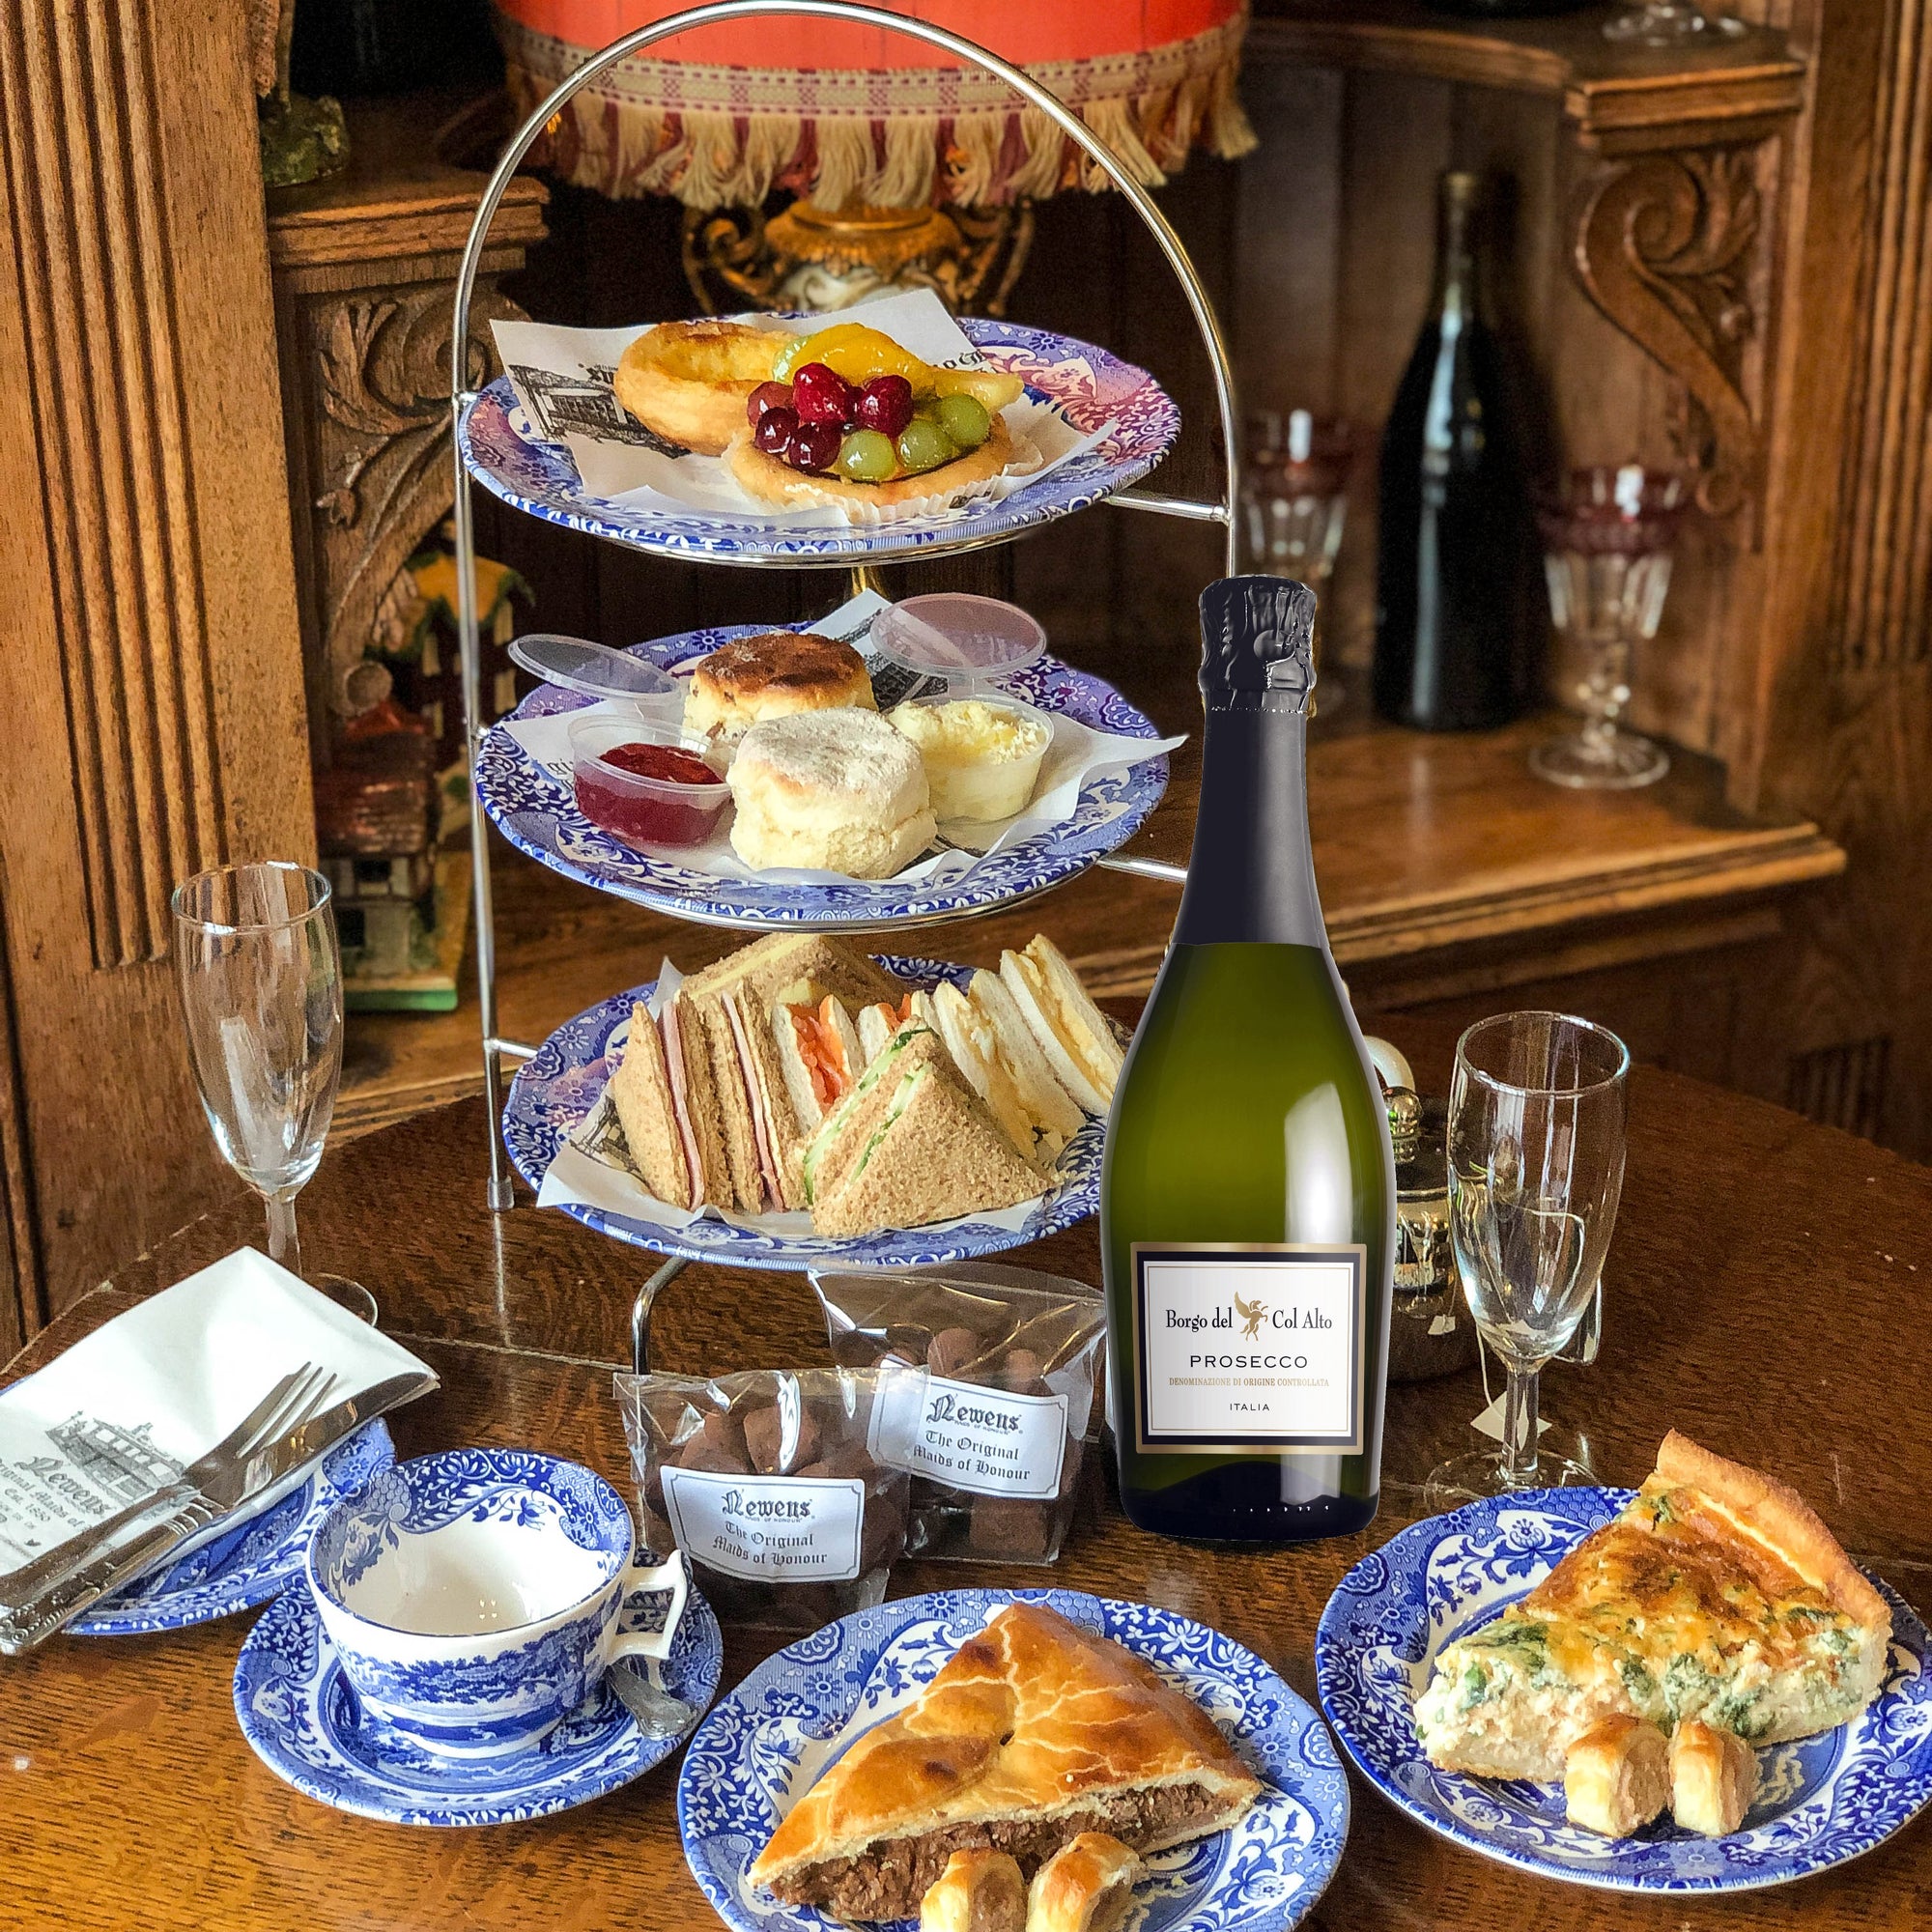 The Special Prosecco Tea at Home (for 2)